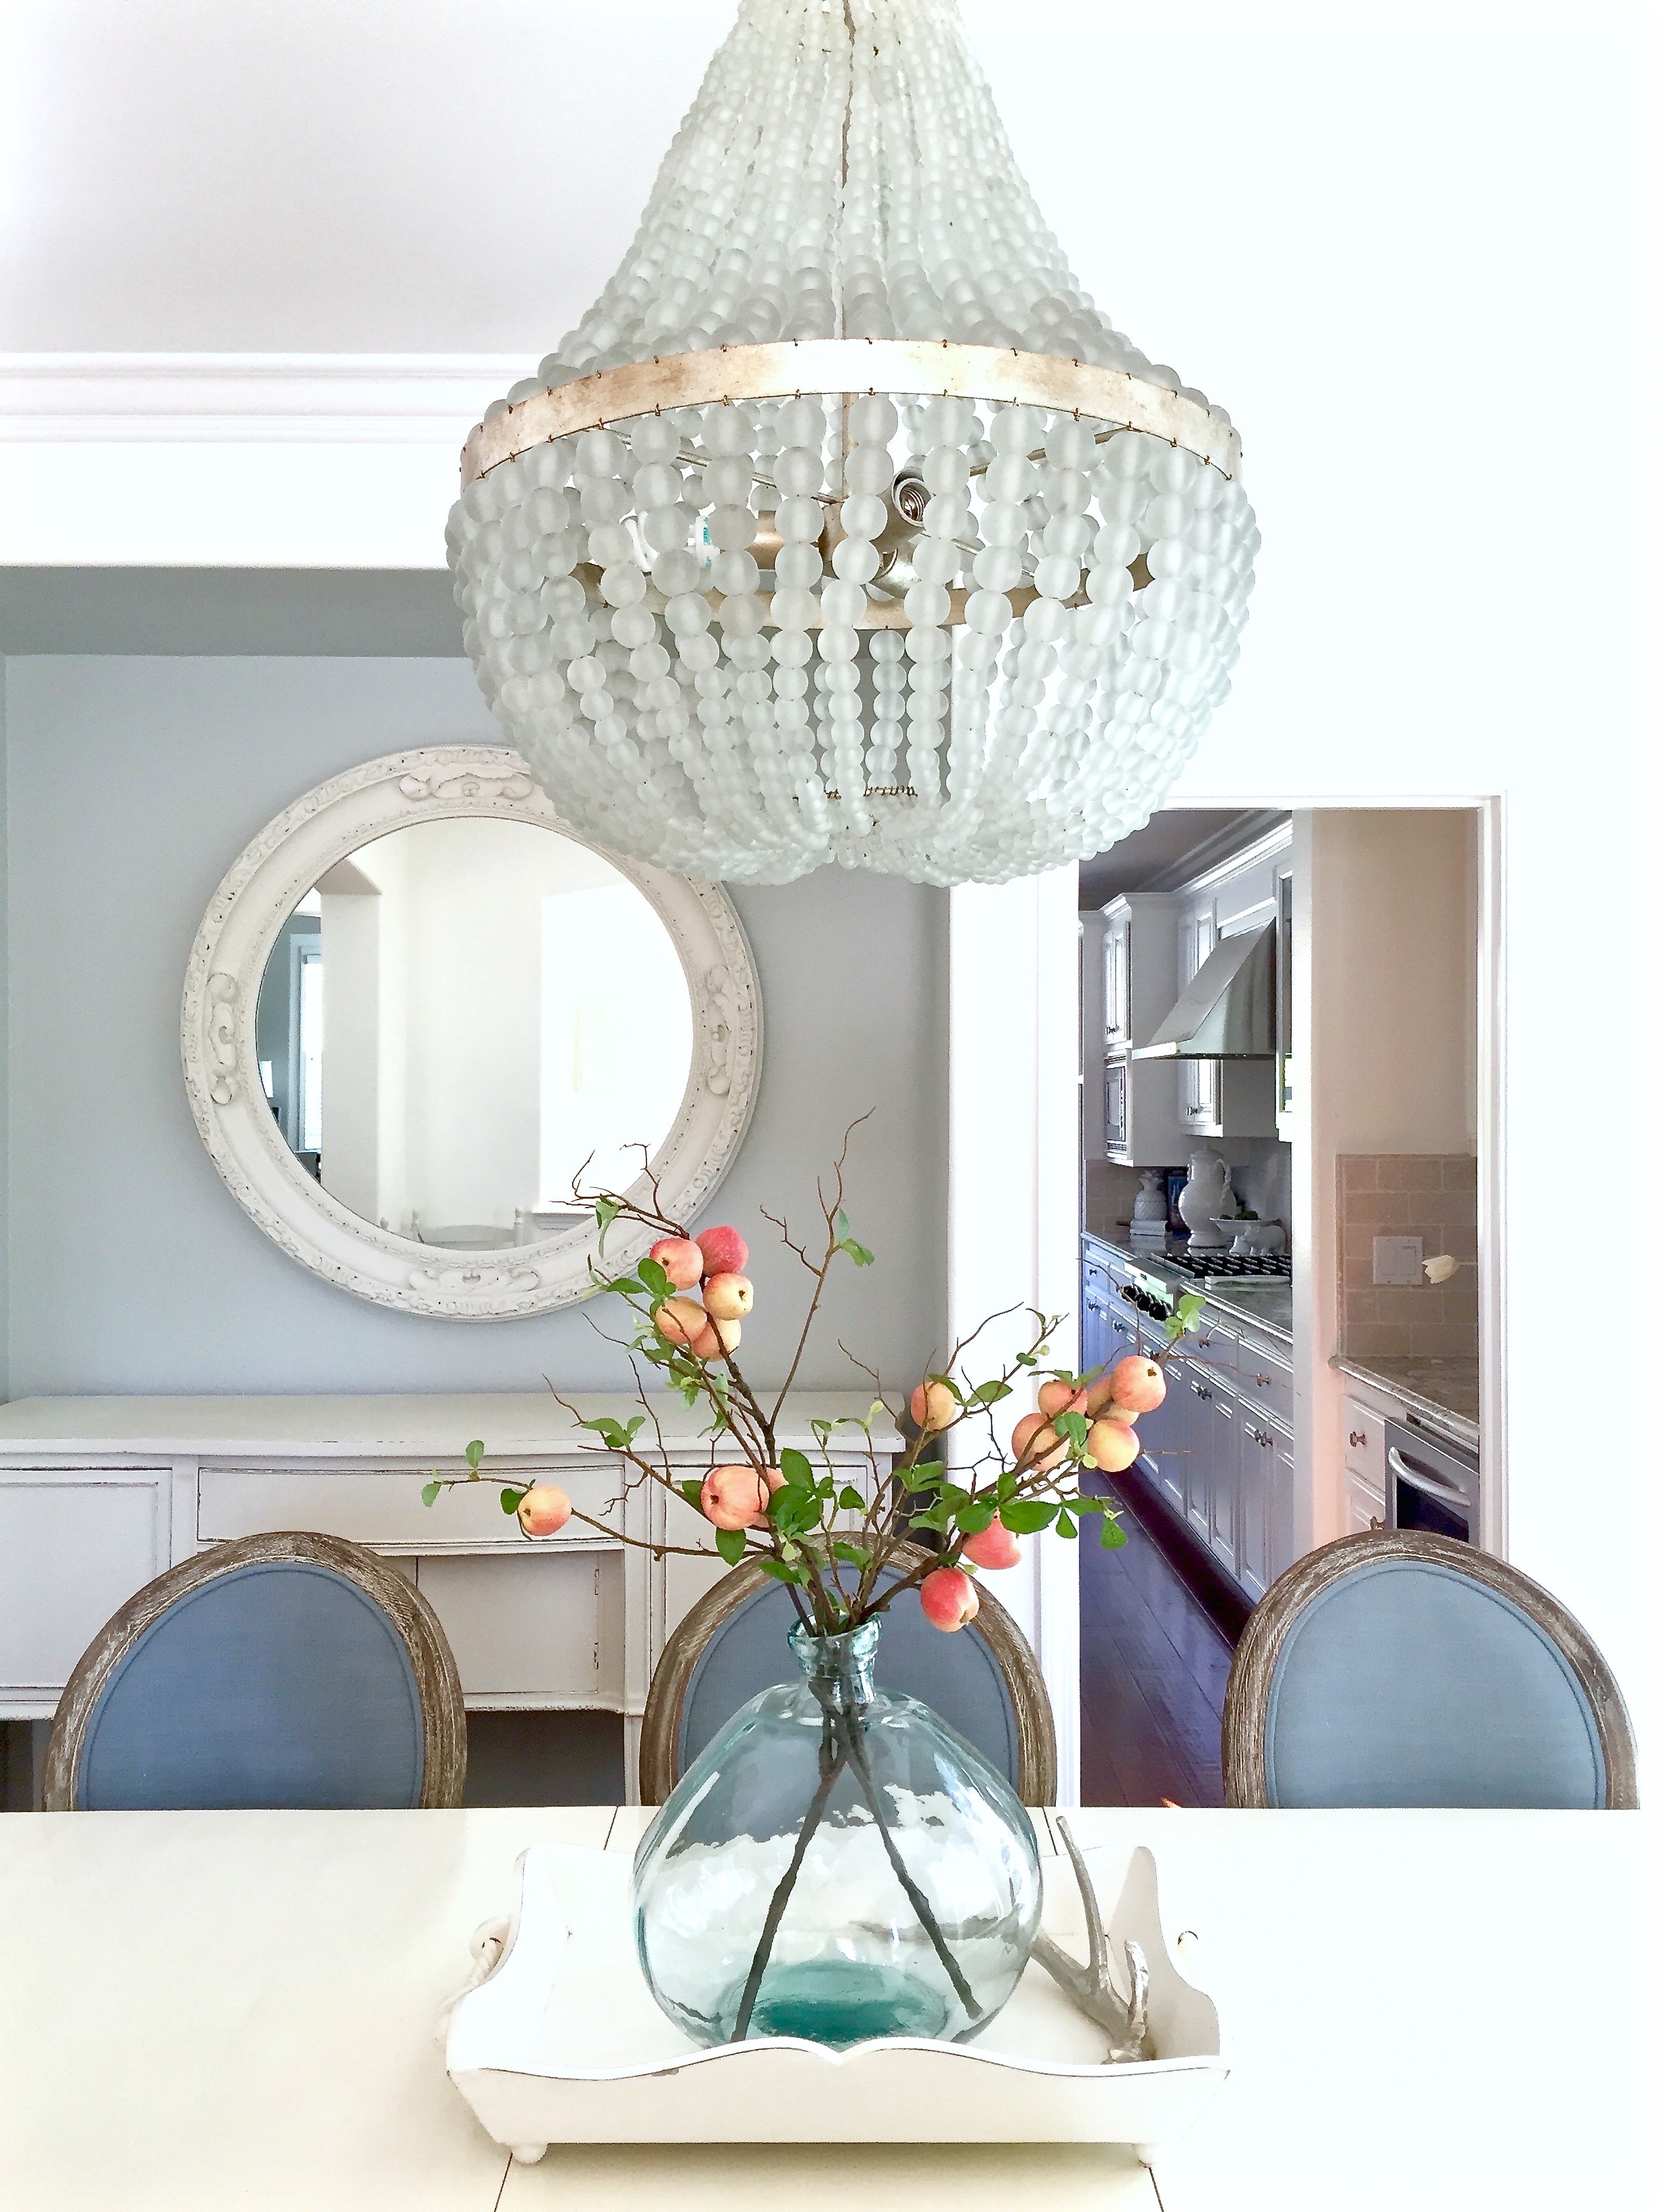 Blue and white dining room with Edisto white beaded chandelierf rom Kathy Kuo Home. https://kristywicks.com